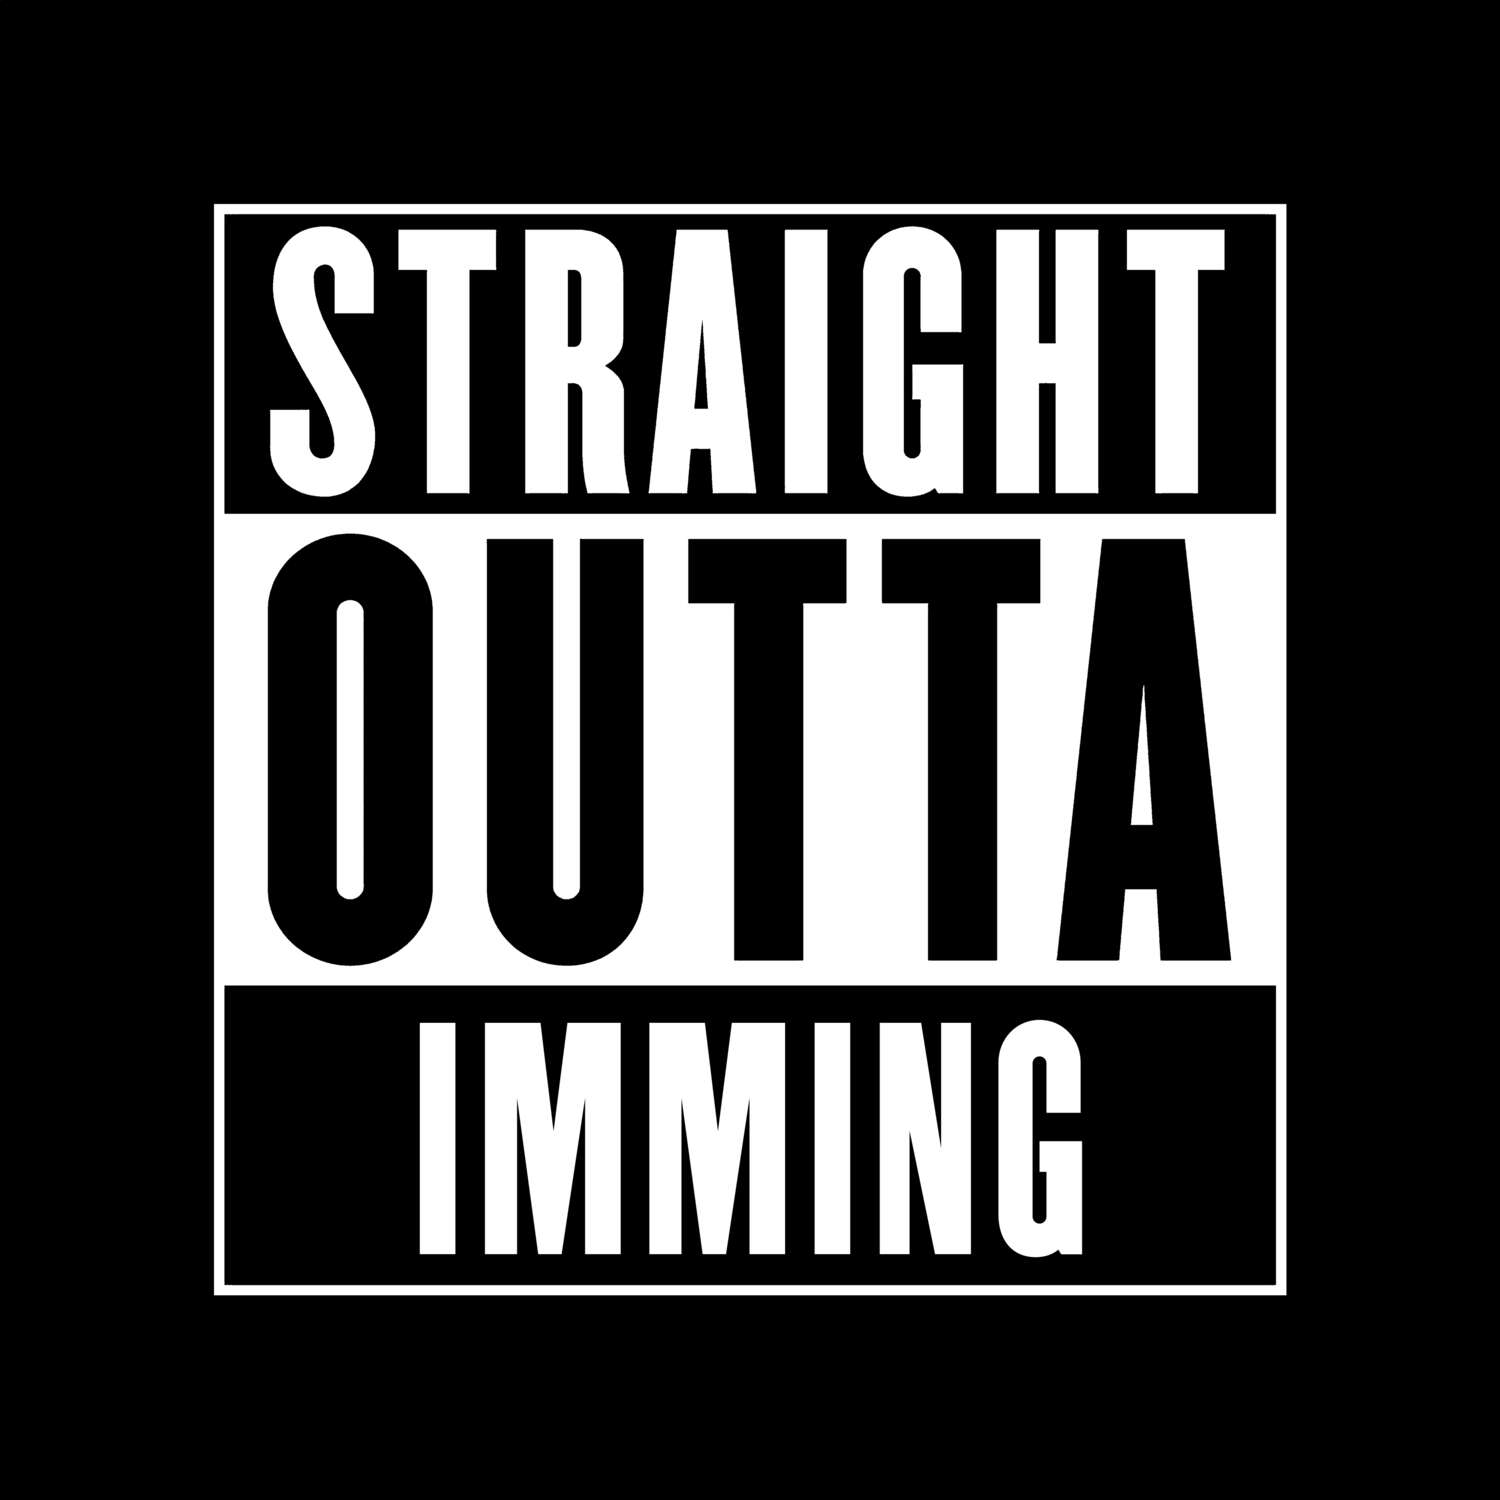 Imming T-Shirt »Straight Outta«